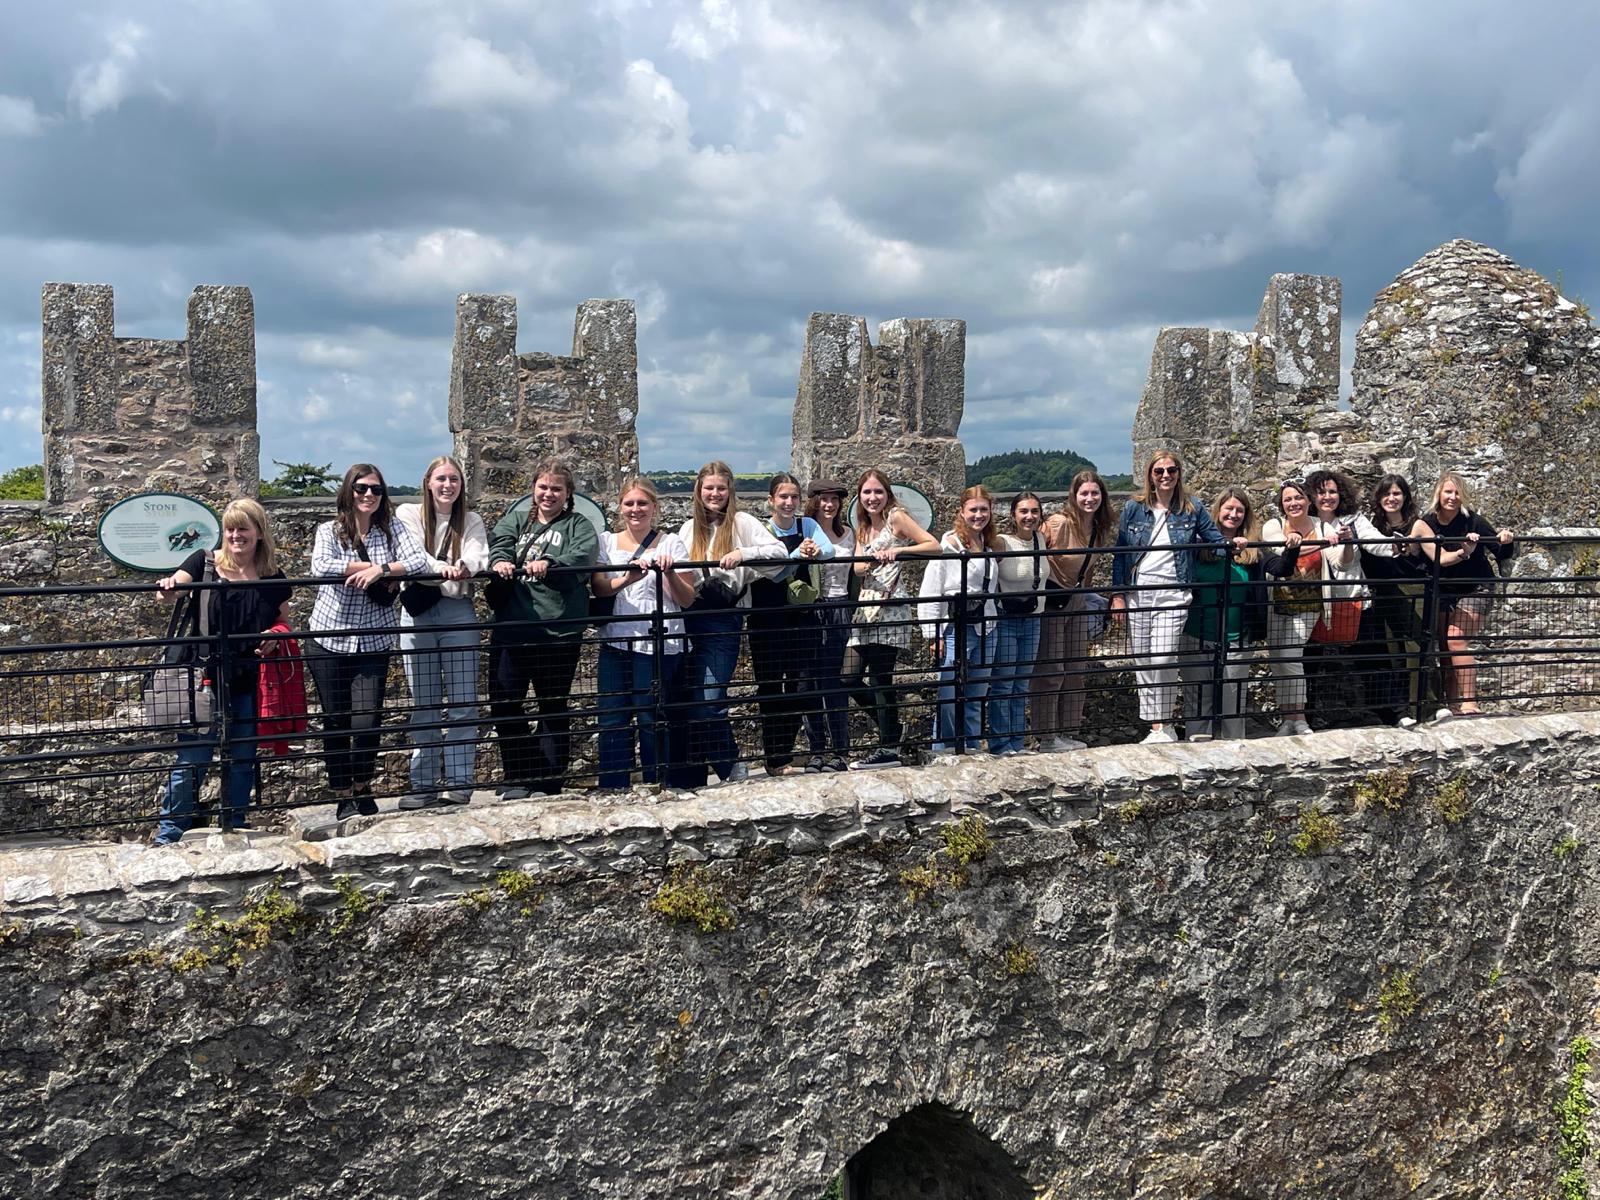 Students and chaperones stand in line to kiss the Blarney Stone at the top of Blarney Castle. Used with permission/Jacob Moore.